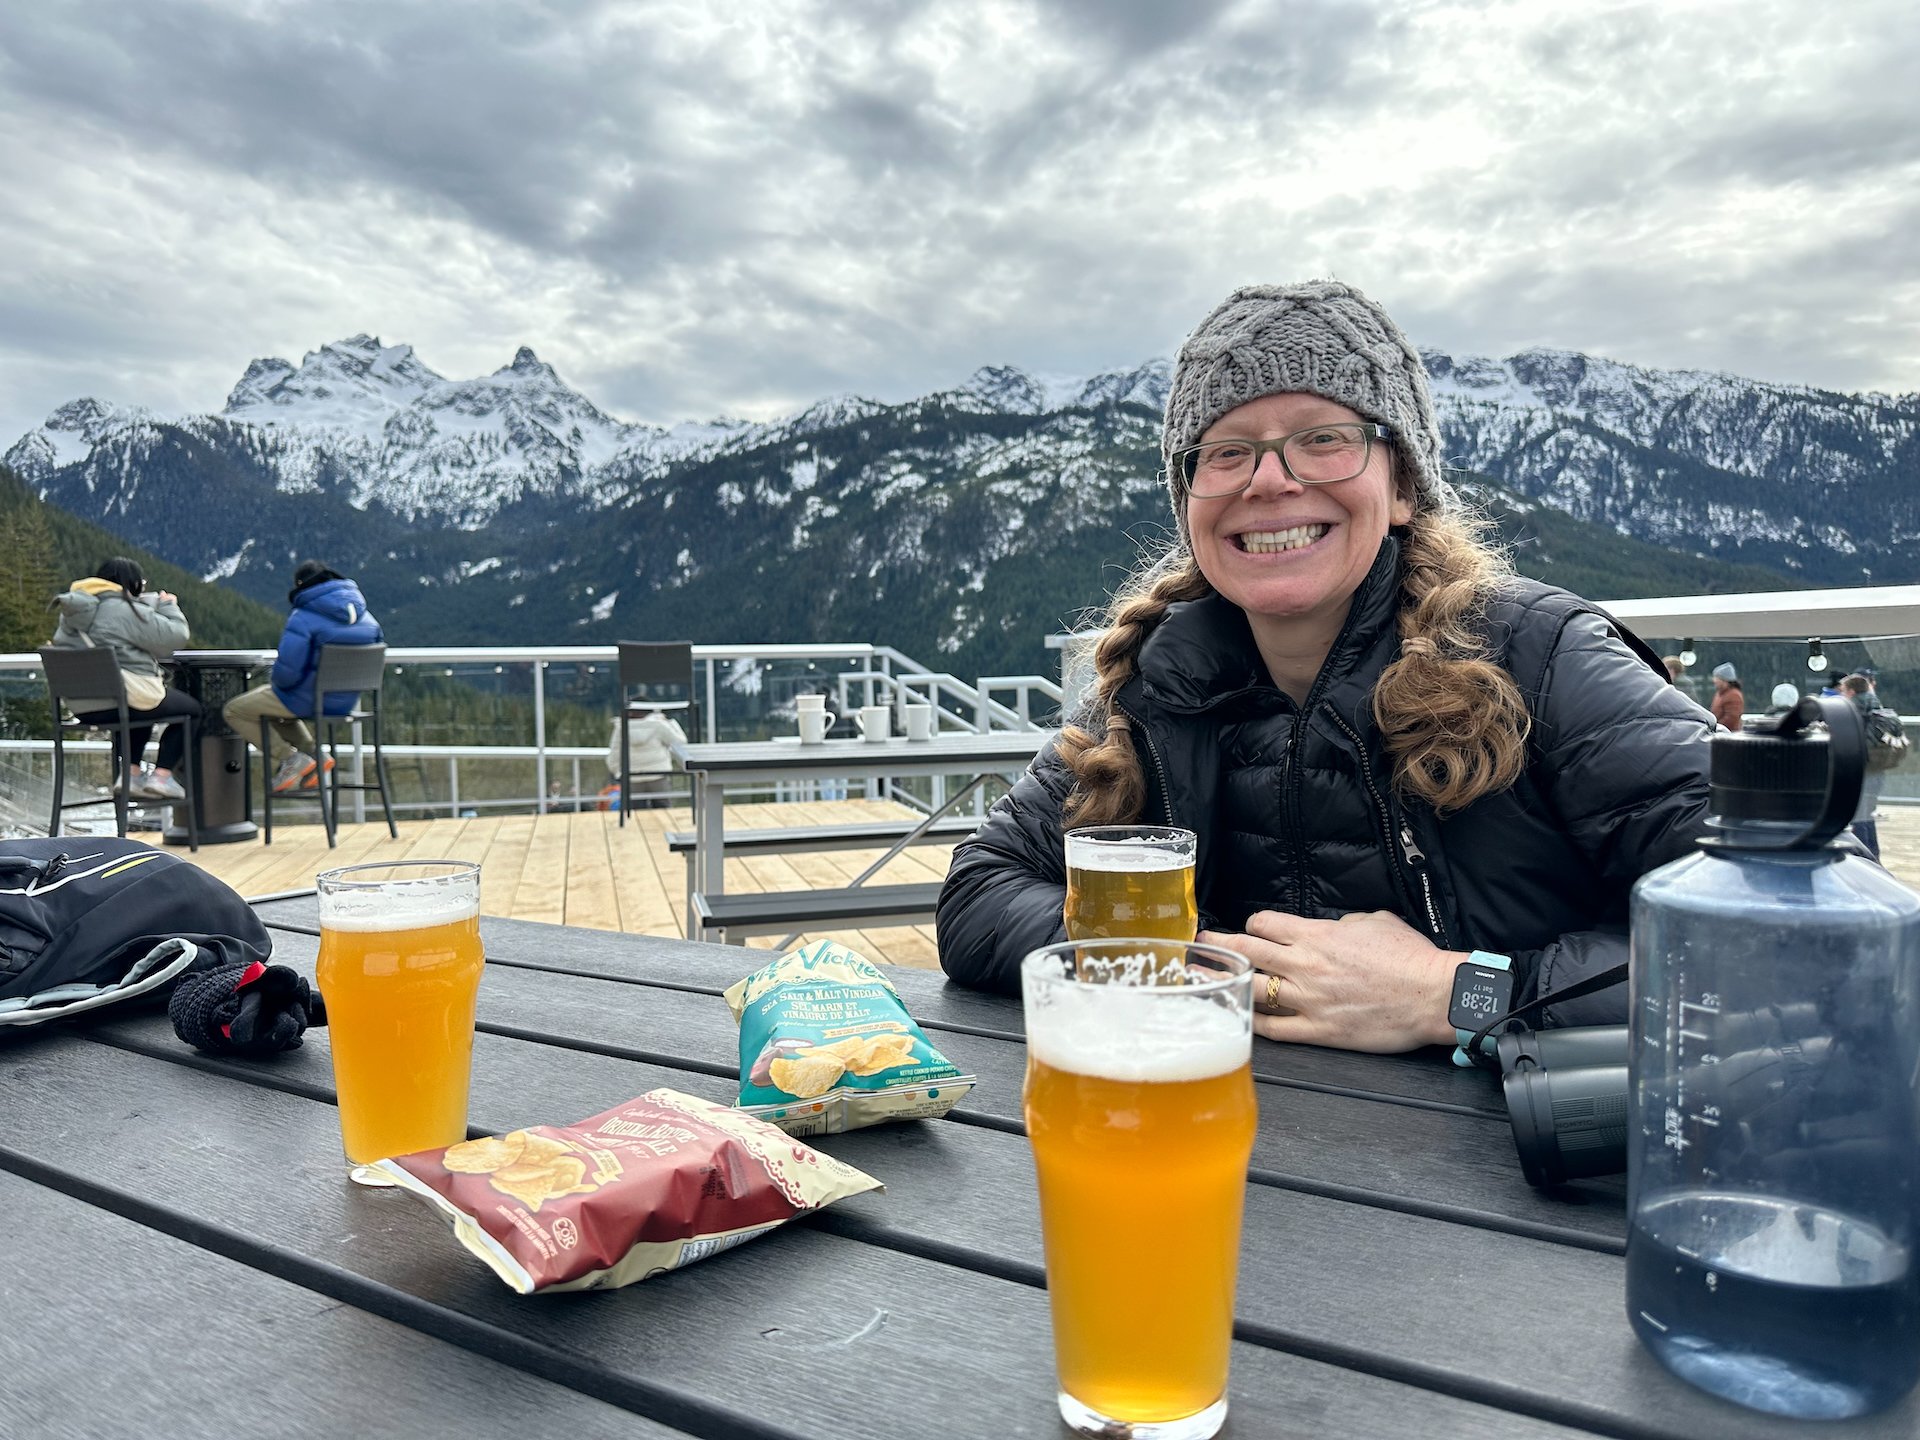  A well-deserved beer on the patio after the hike. 